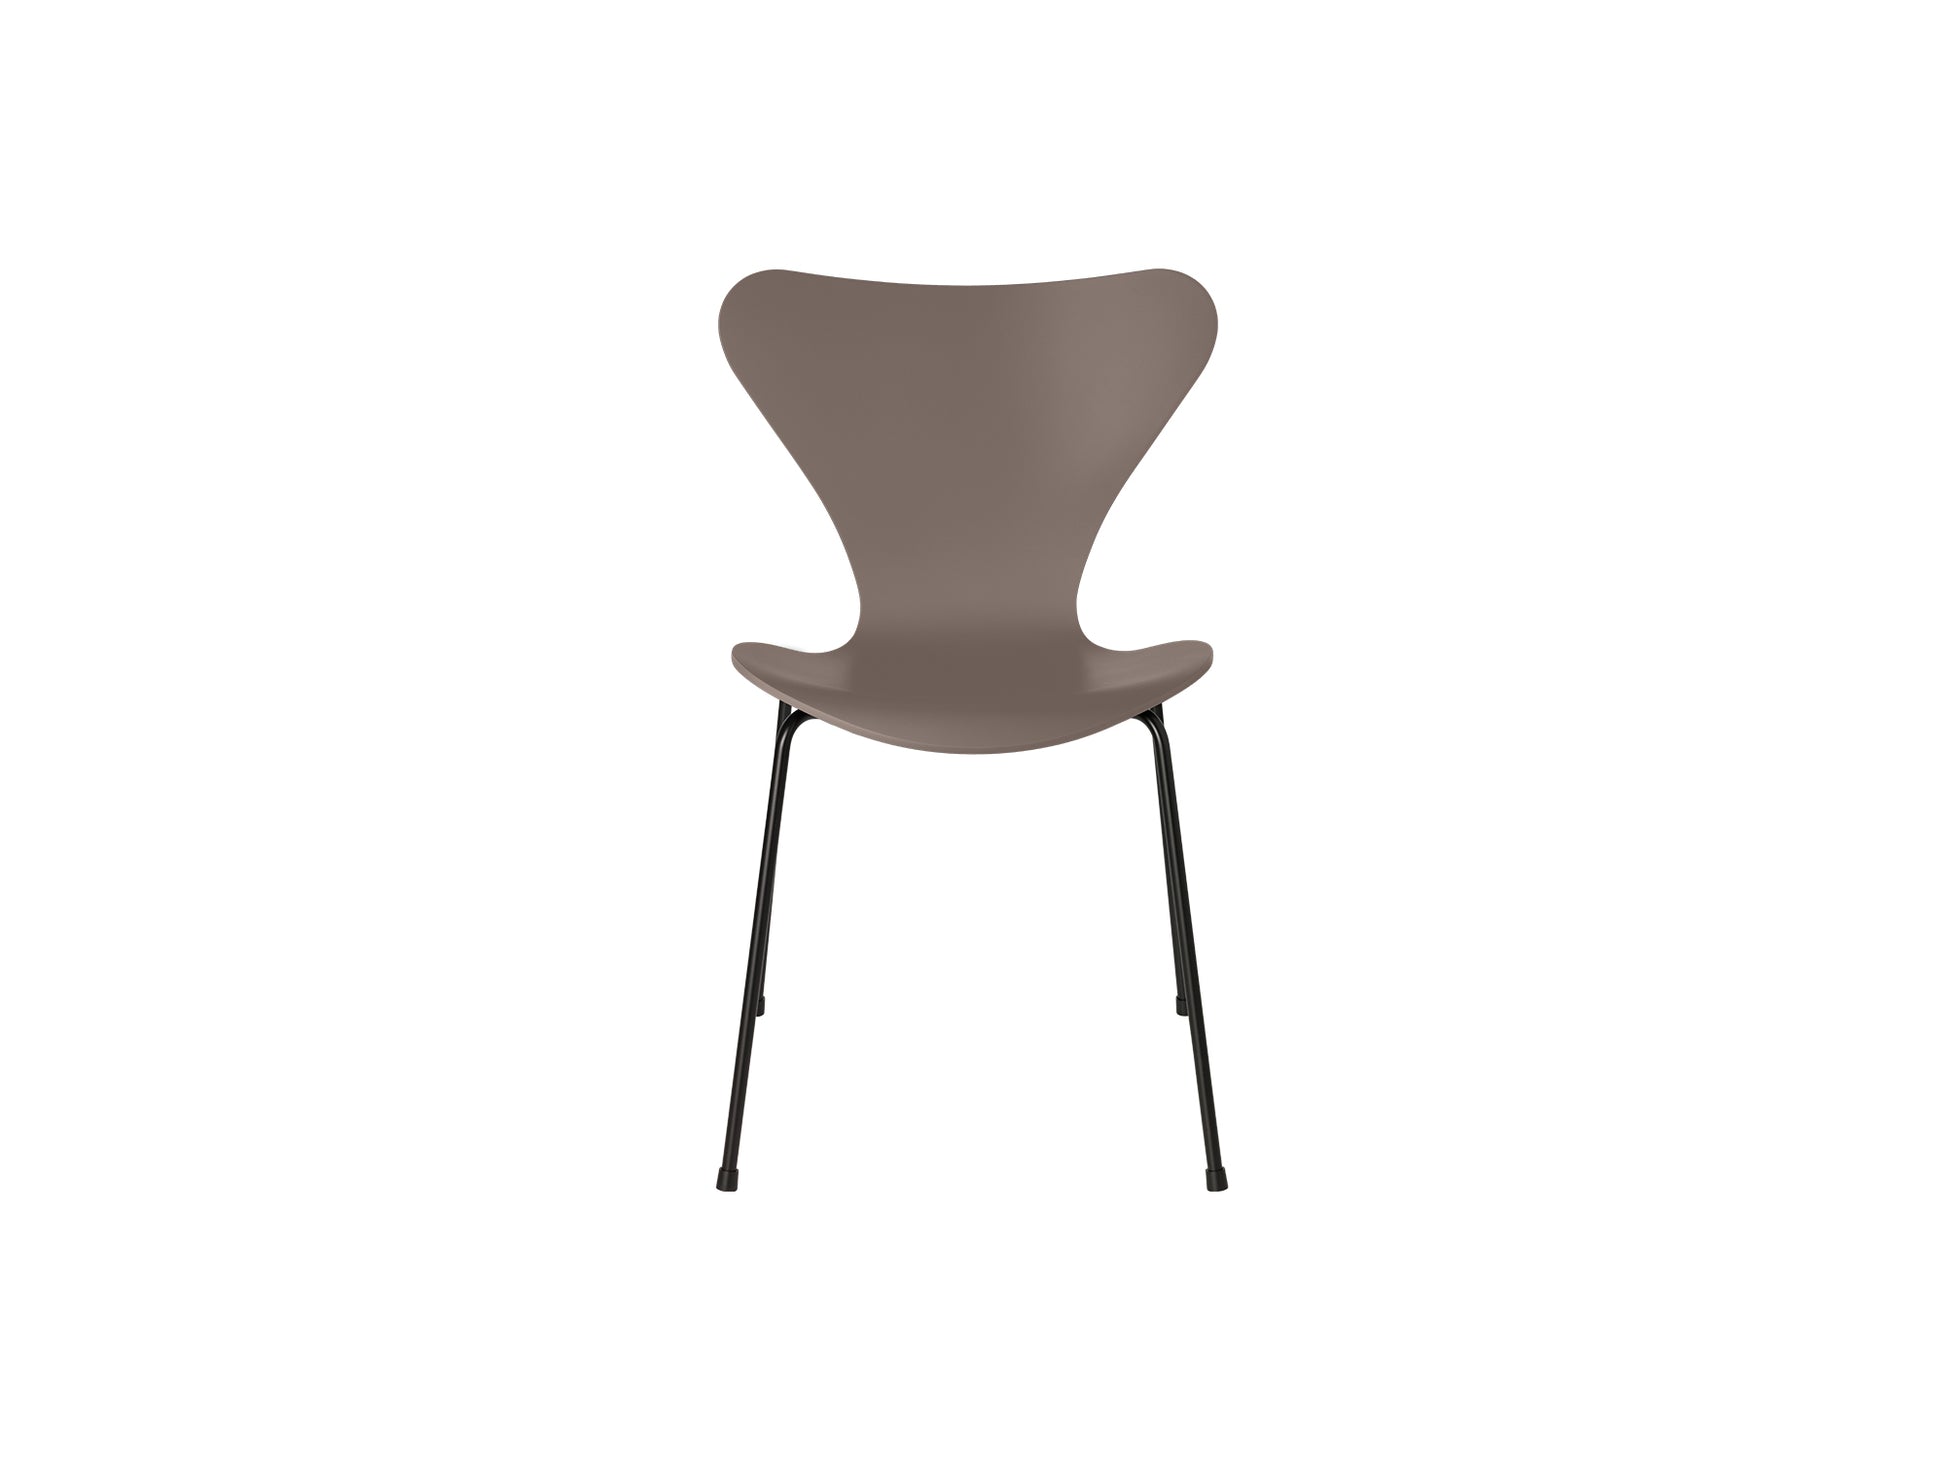 Series 7™ 3107 Dining Chair by Fritz Hansen - Deep Clay Lacquered Veneer Shell / Black Steel